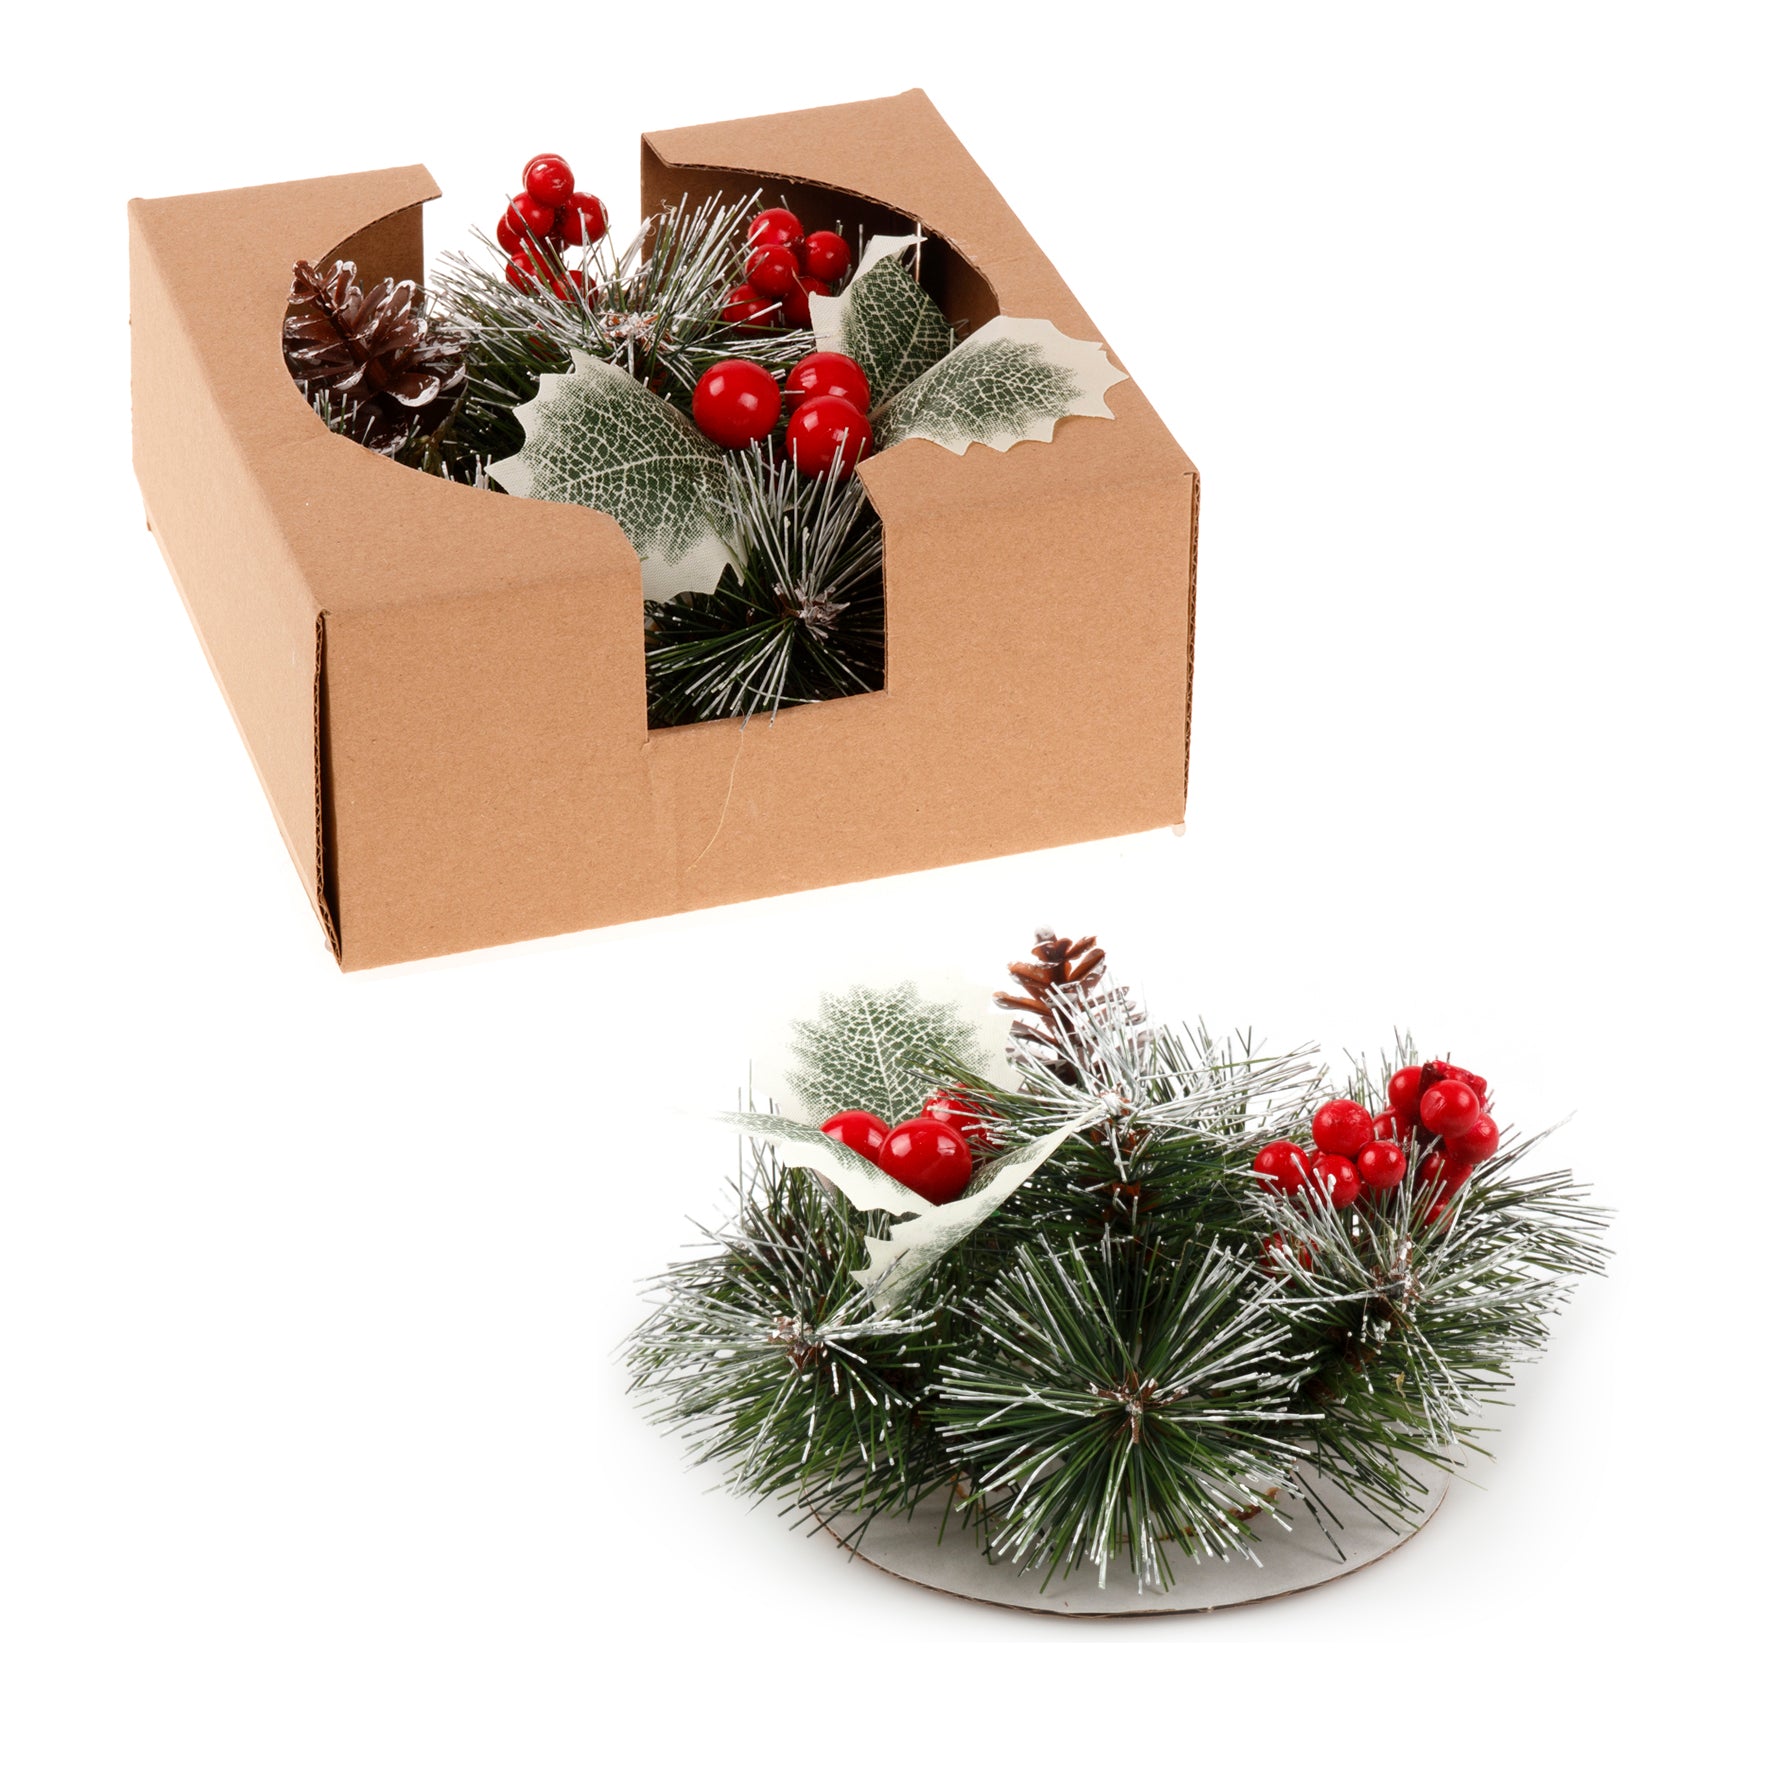 Christmas Floral Table Arrangements Red Berries Pine Cones Flowers Decorations, Large